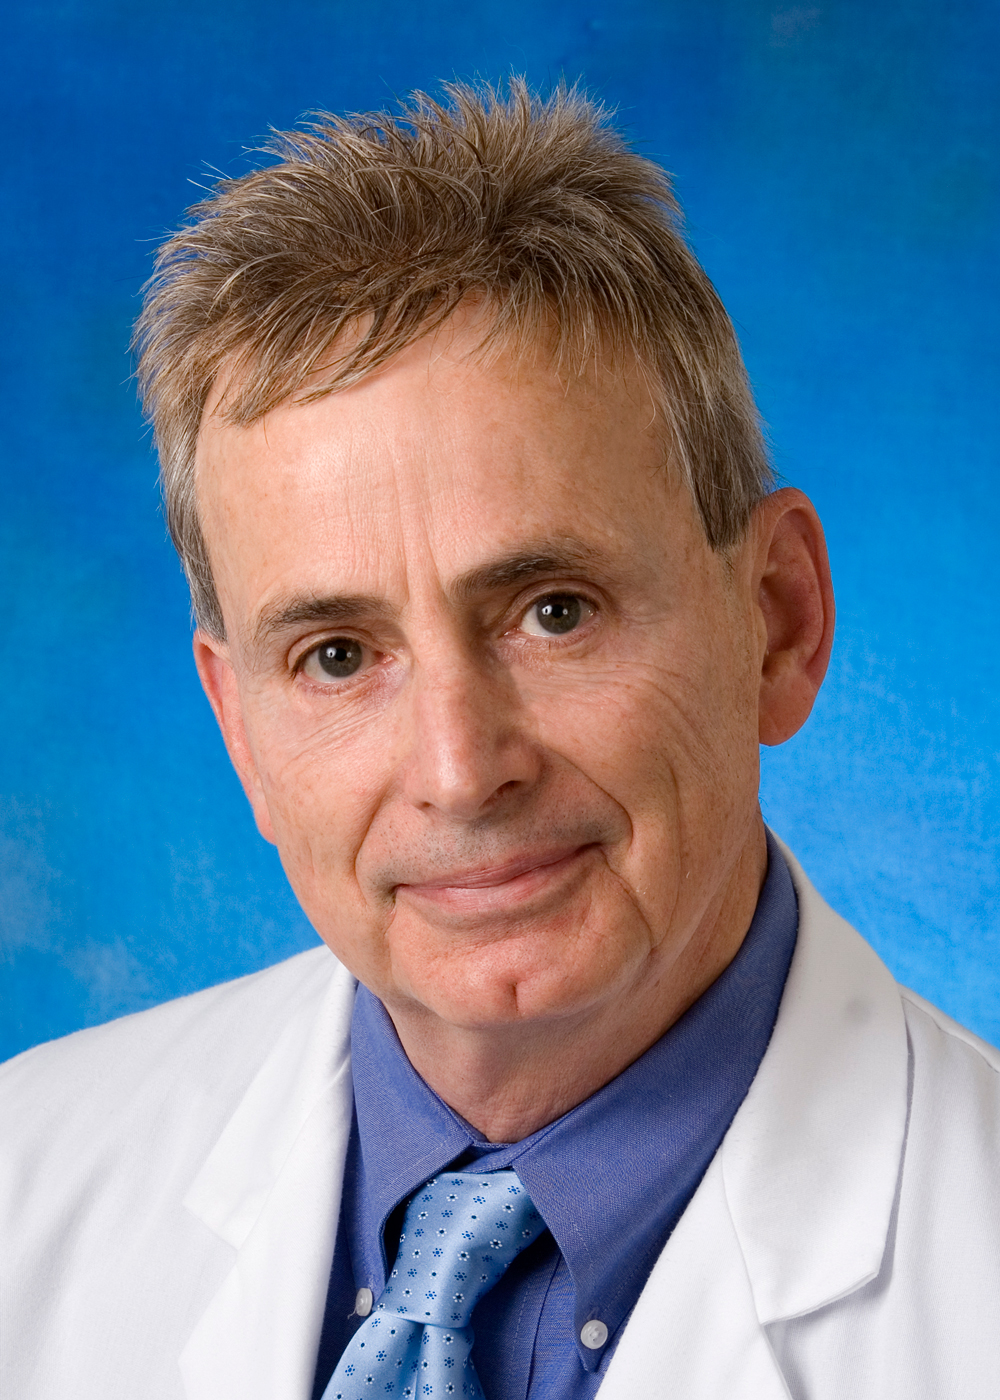 David Stanley, MD, is a board-certified vascular surgeon and Medical Director of the Methodist Wound Treatment Center.